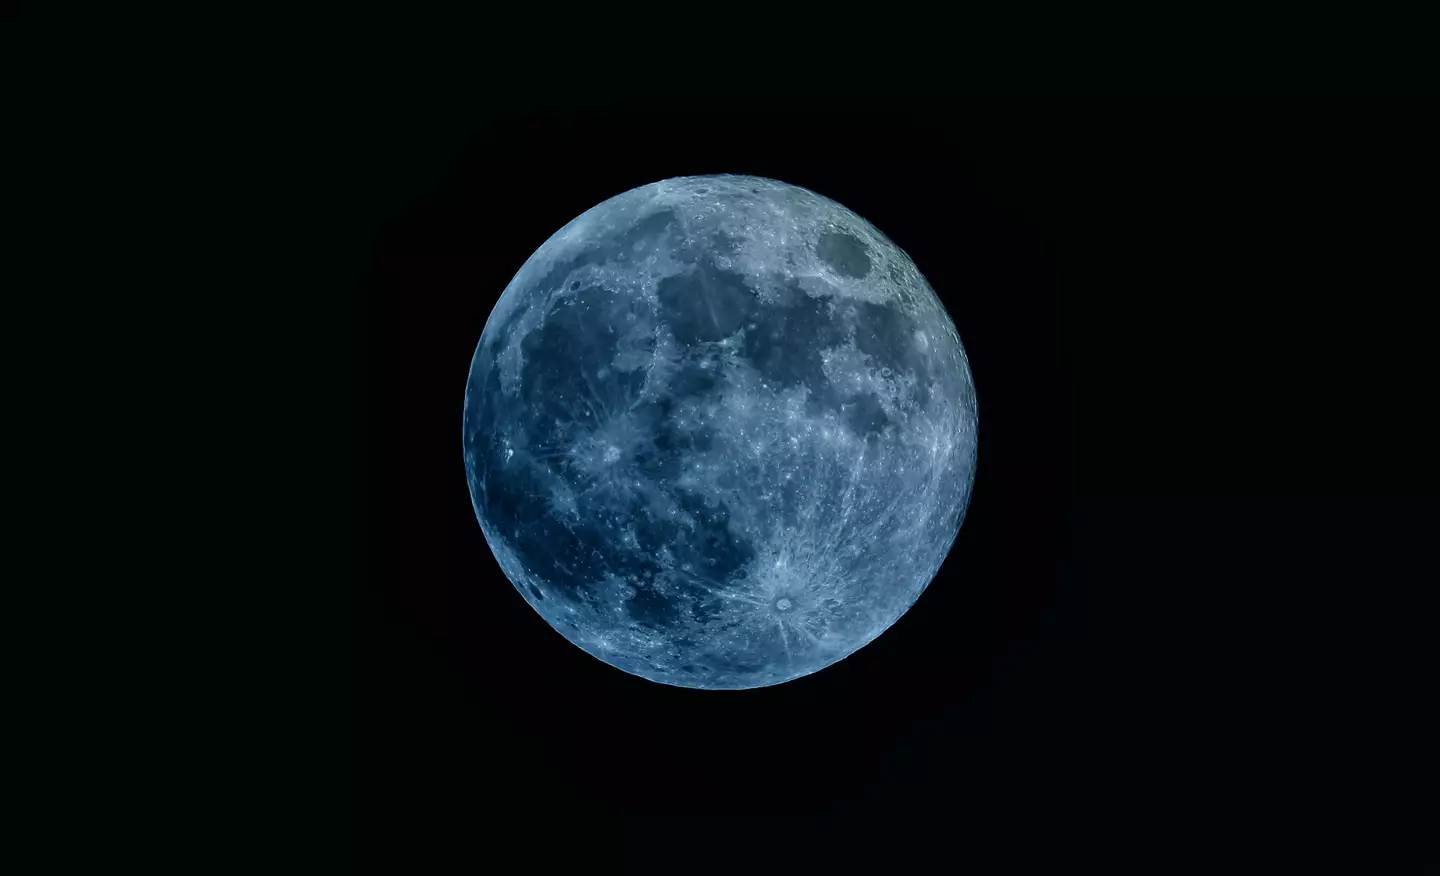 The 'Blue Supermoon' will be visible in the sky on Wednesday (30 August).